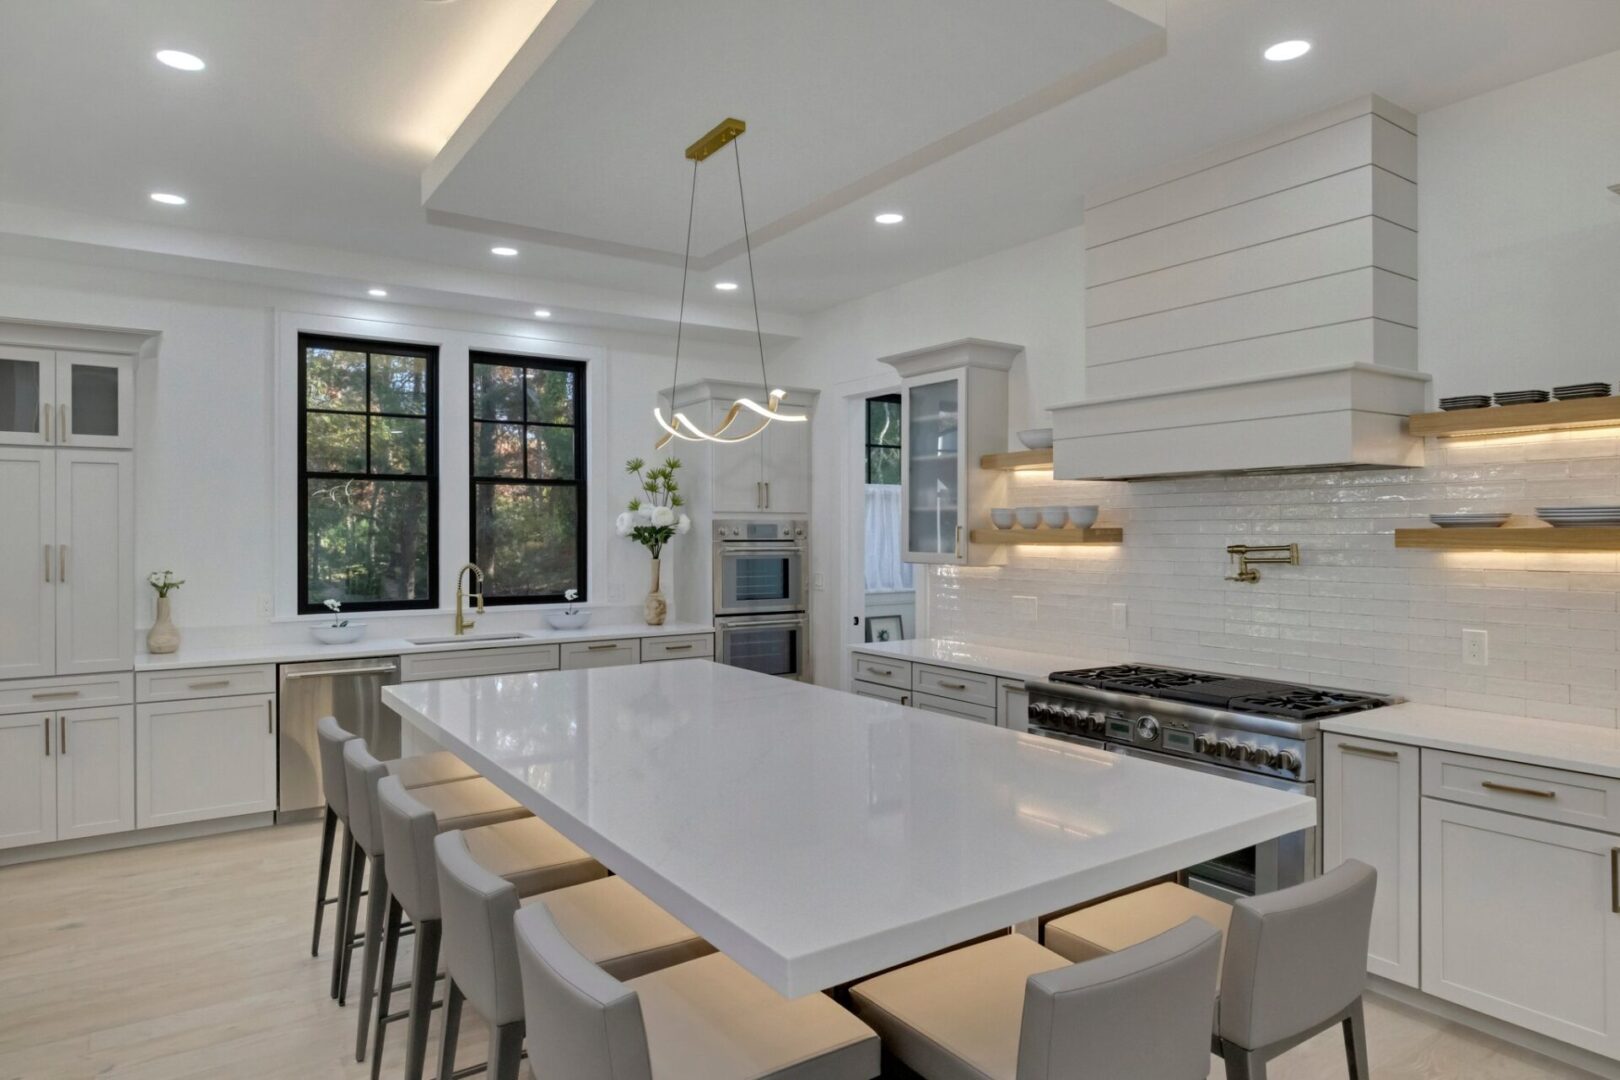 A large white table in the middle of a kitchen.